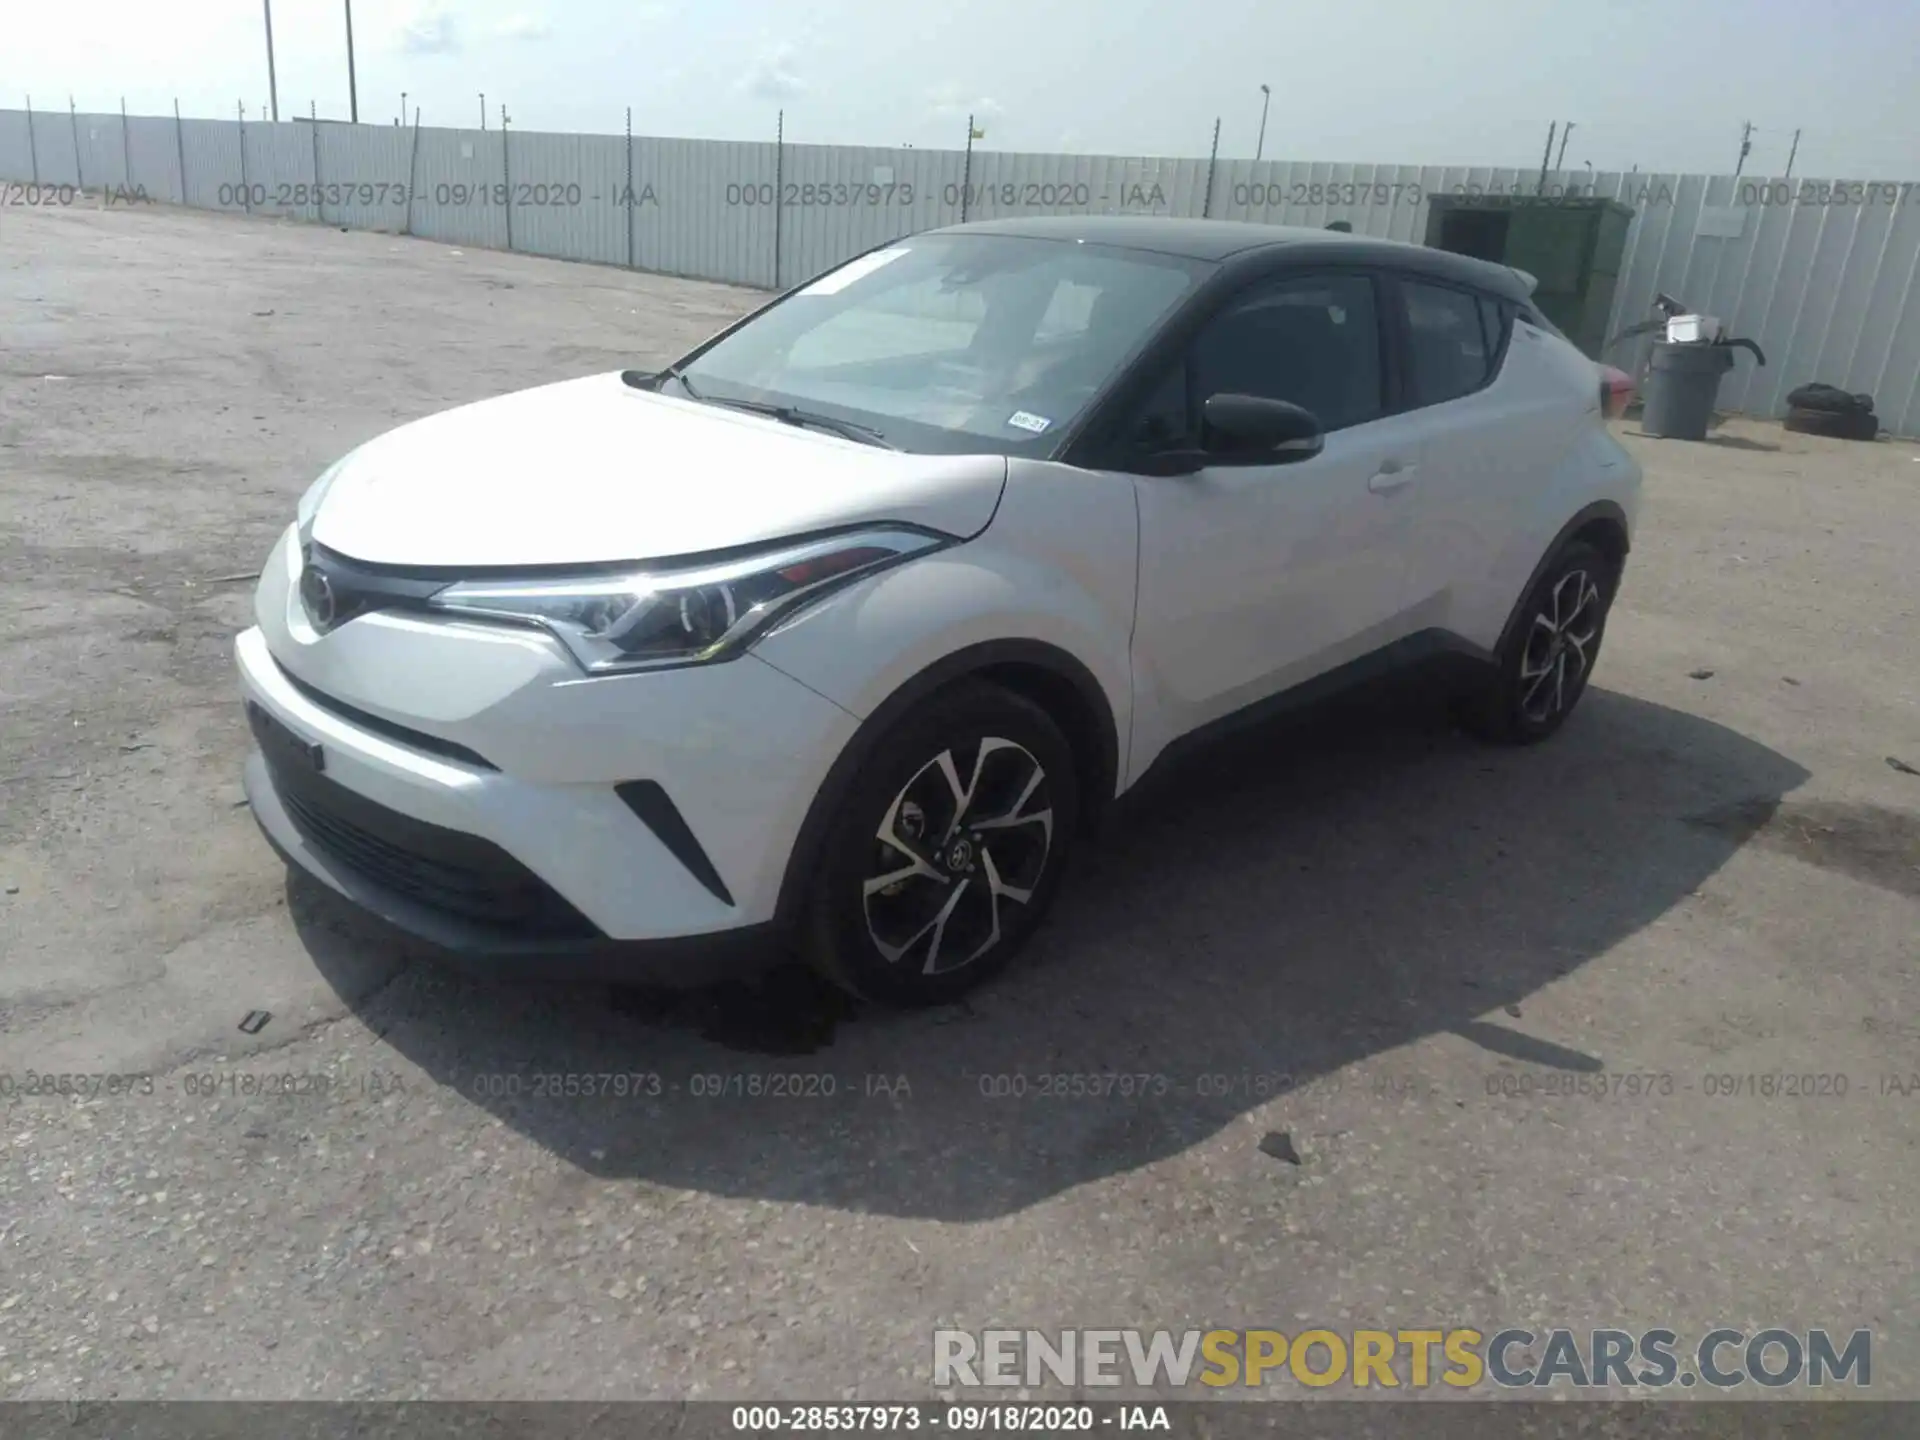 2 Photograph of a damaged car NMTKHMBXXKR085298 TOYOTA C-HR 2019